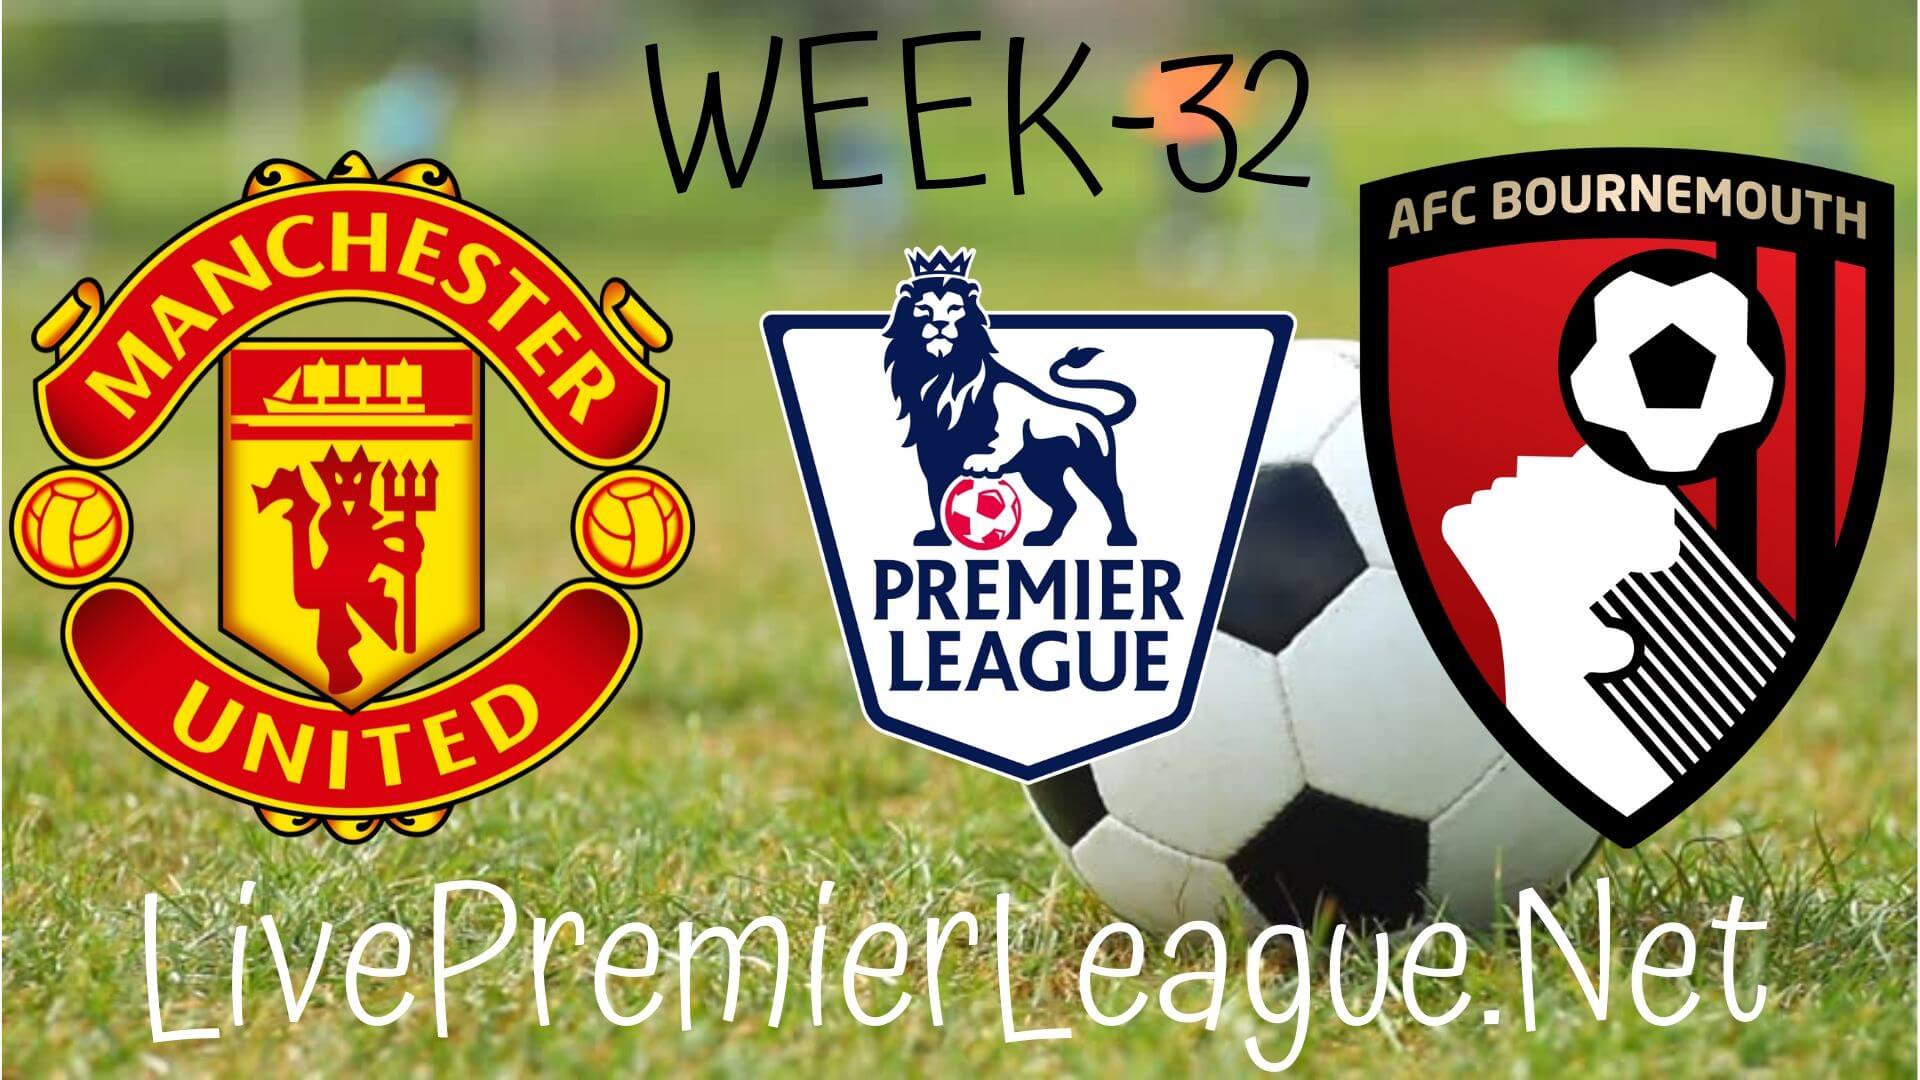 Manchester United Vs AFC Bournemouth Live Stream | EPL Week 33